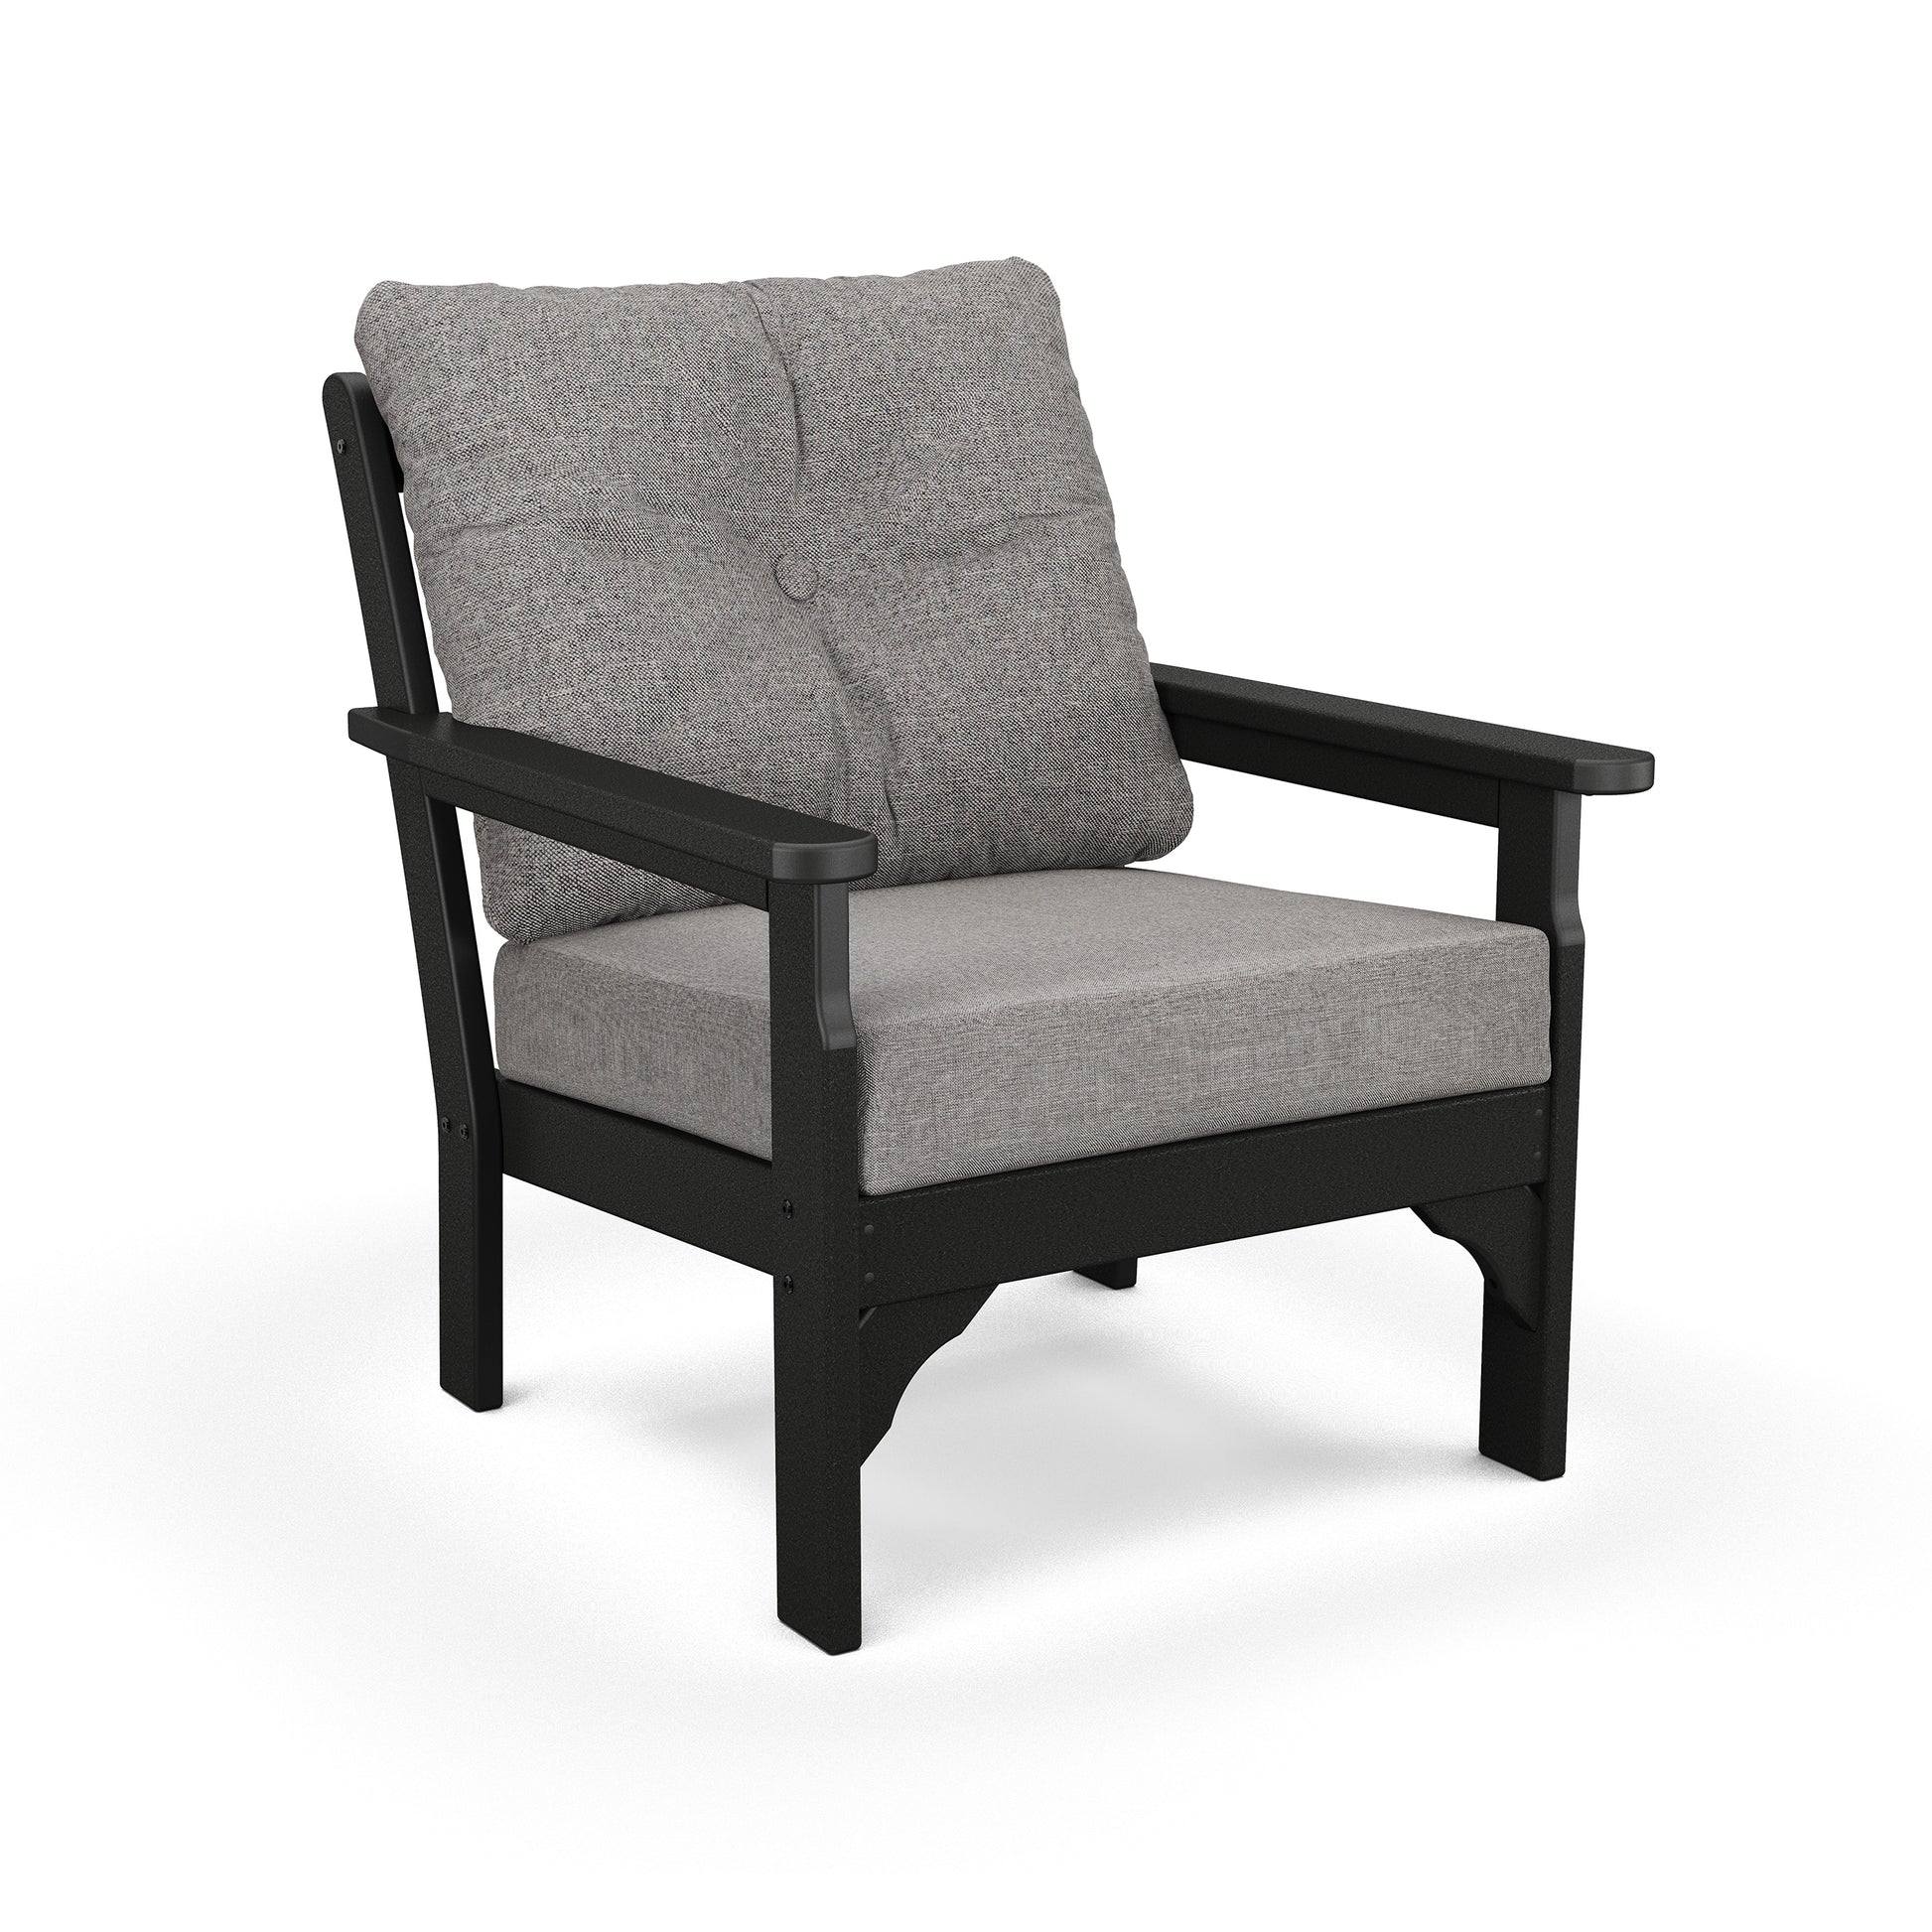 A modern POLYWOOD Vineyard Deep Seating Chair with a black frame and all-weather fabric gray cushions, featuring clean lines and a single button tuft on the back cushion. The chair is shown against a